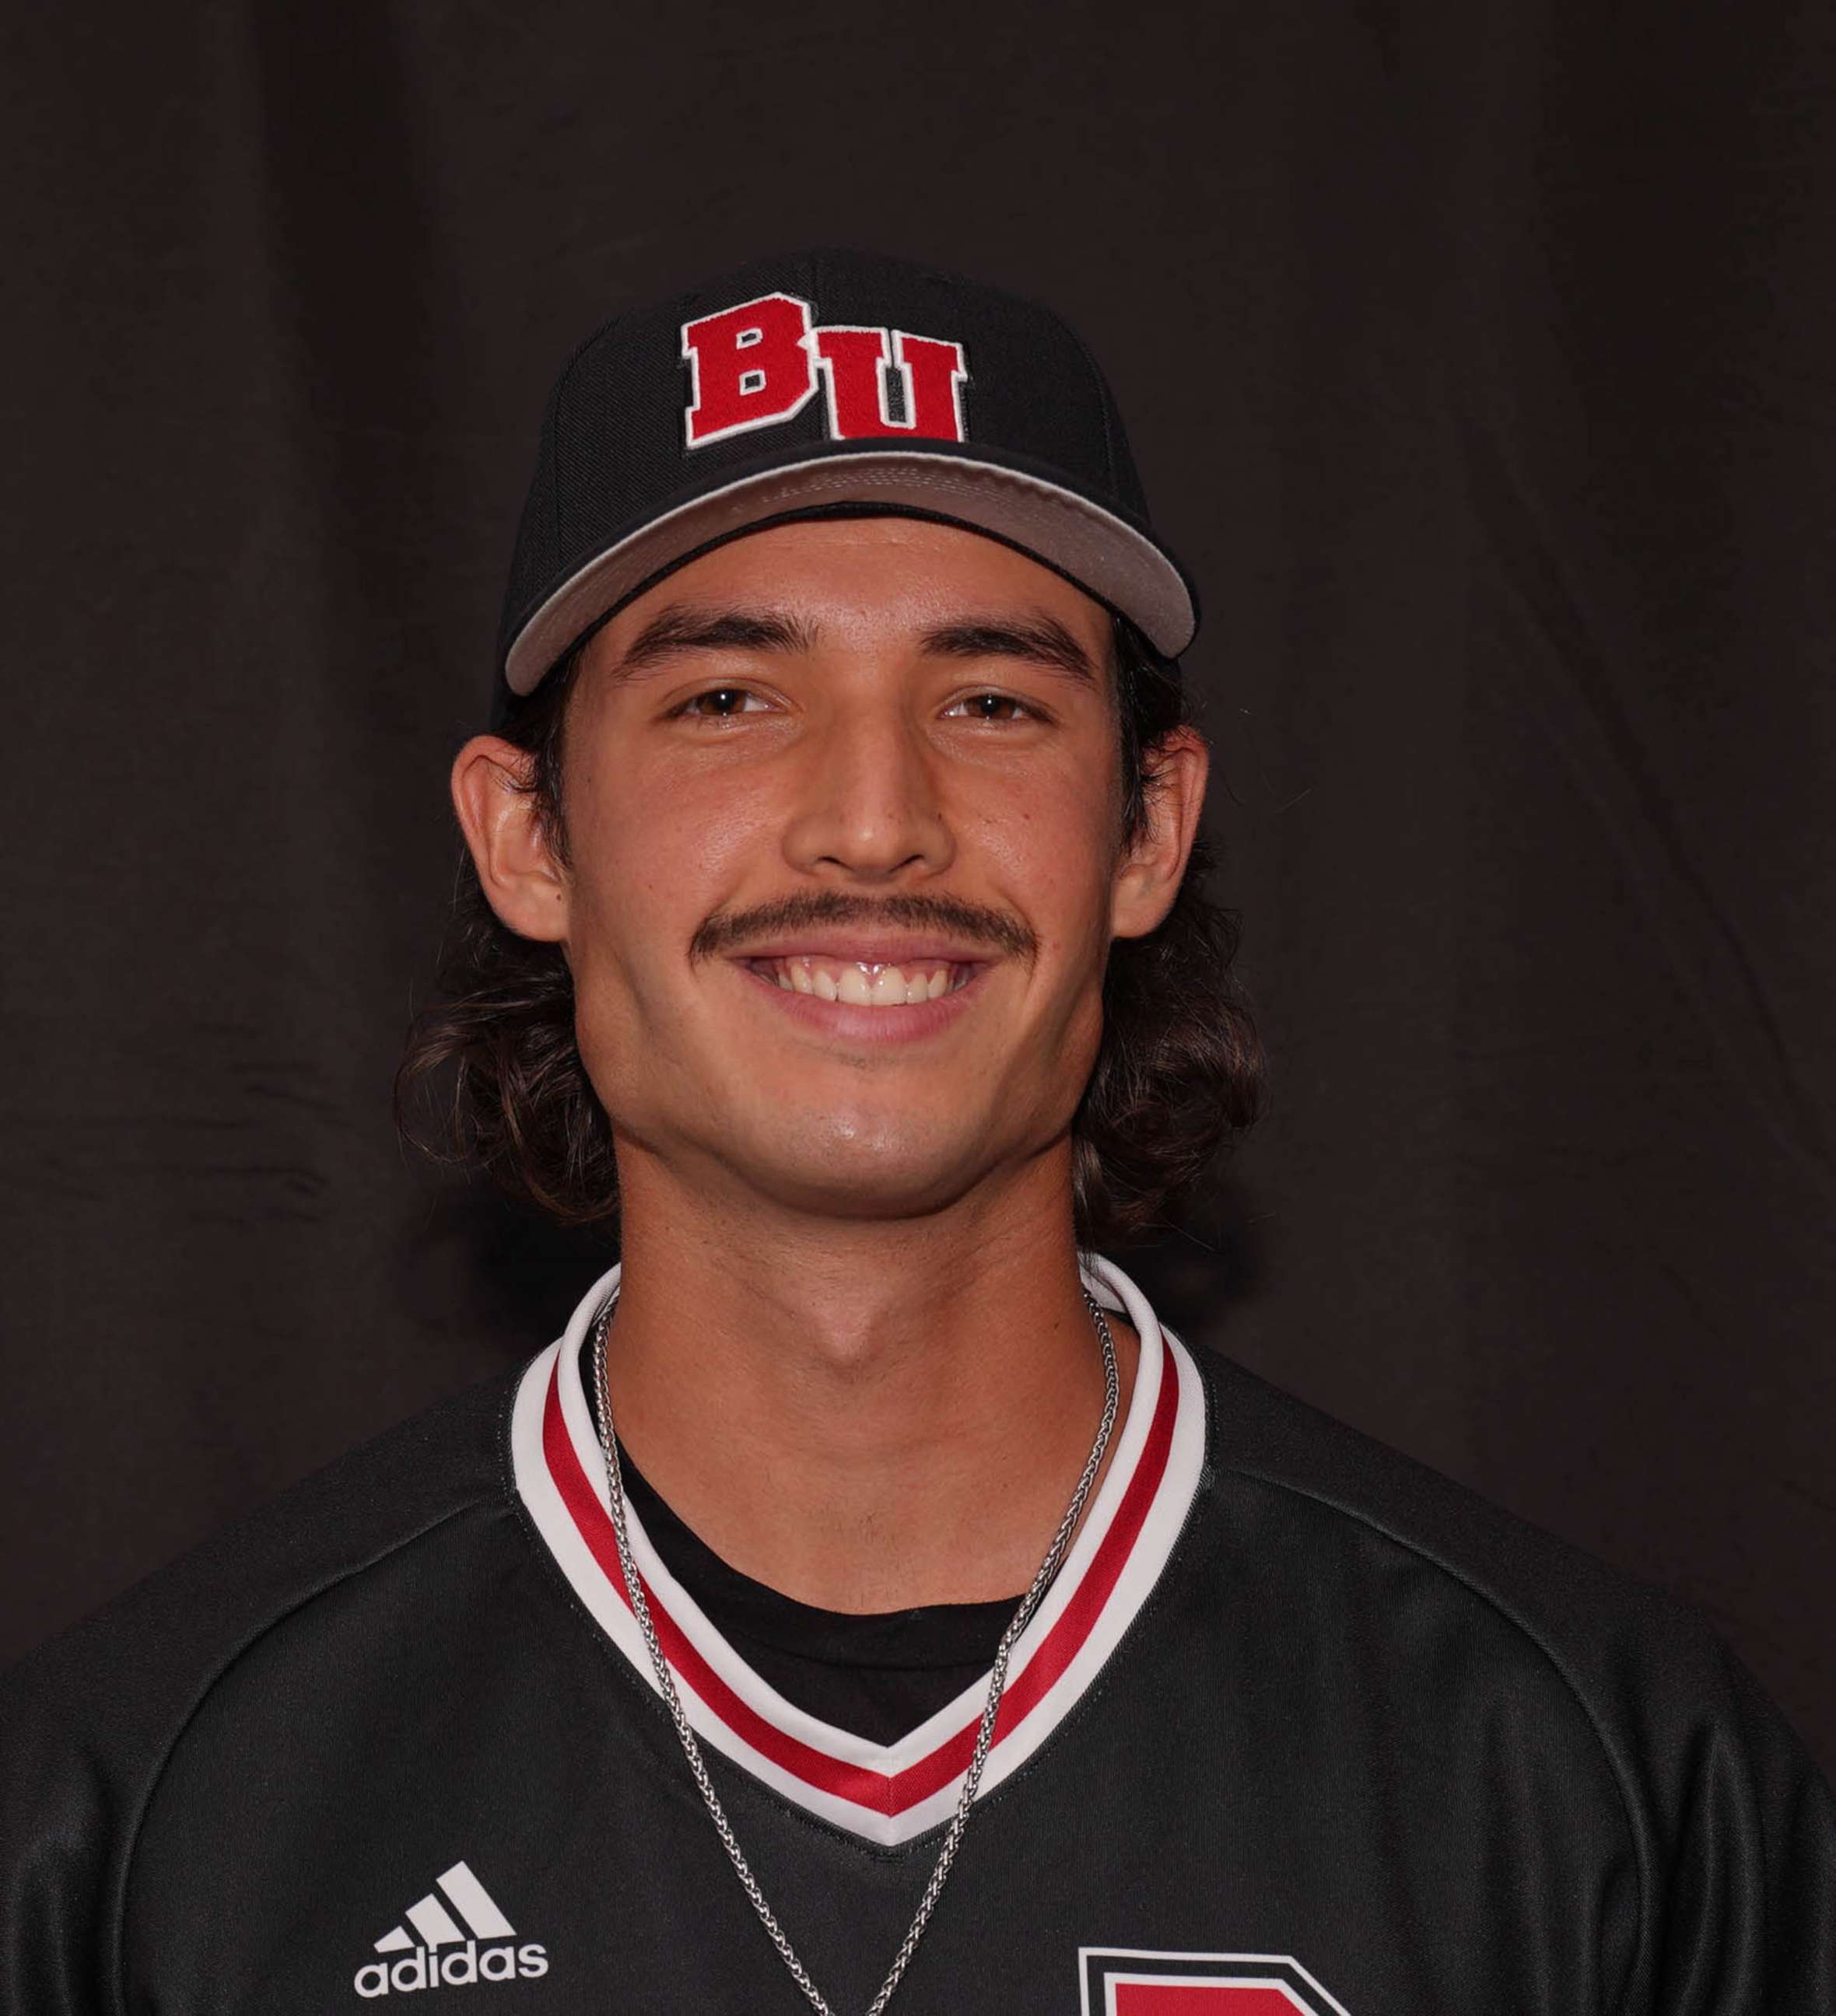 PHOTO: RobertAnthony Cruz is pictured in an undated portrait from his baseball career on the Biola University Eagles team.